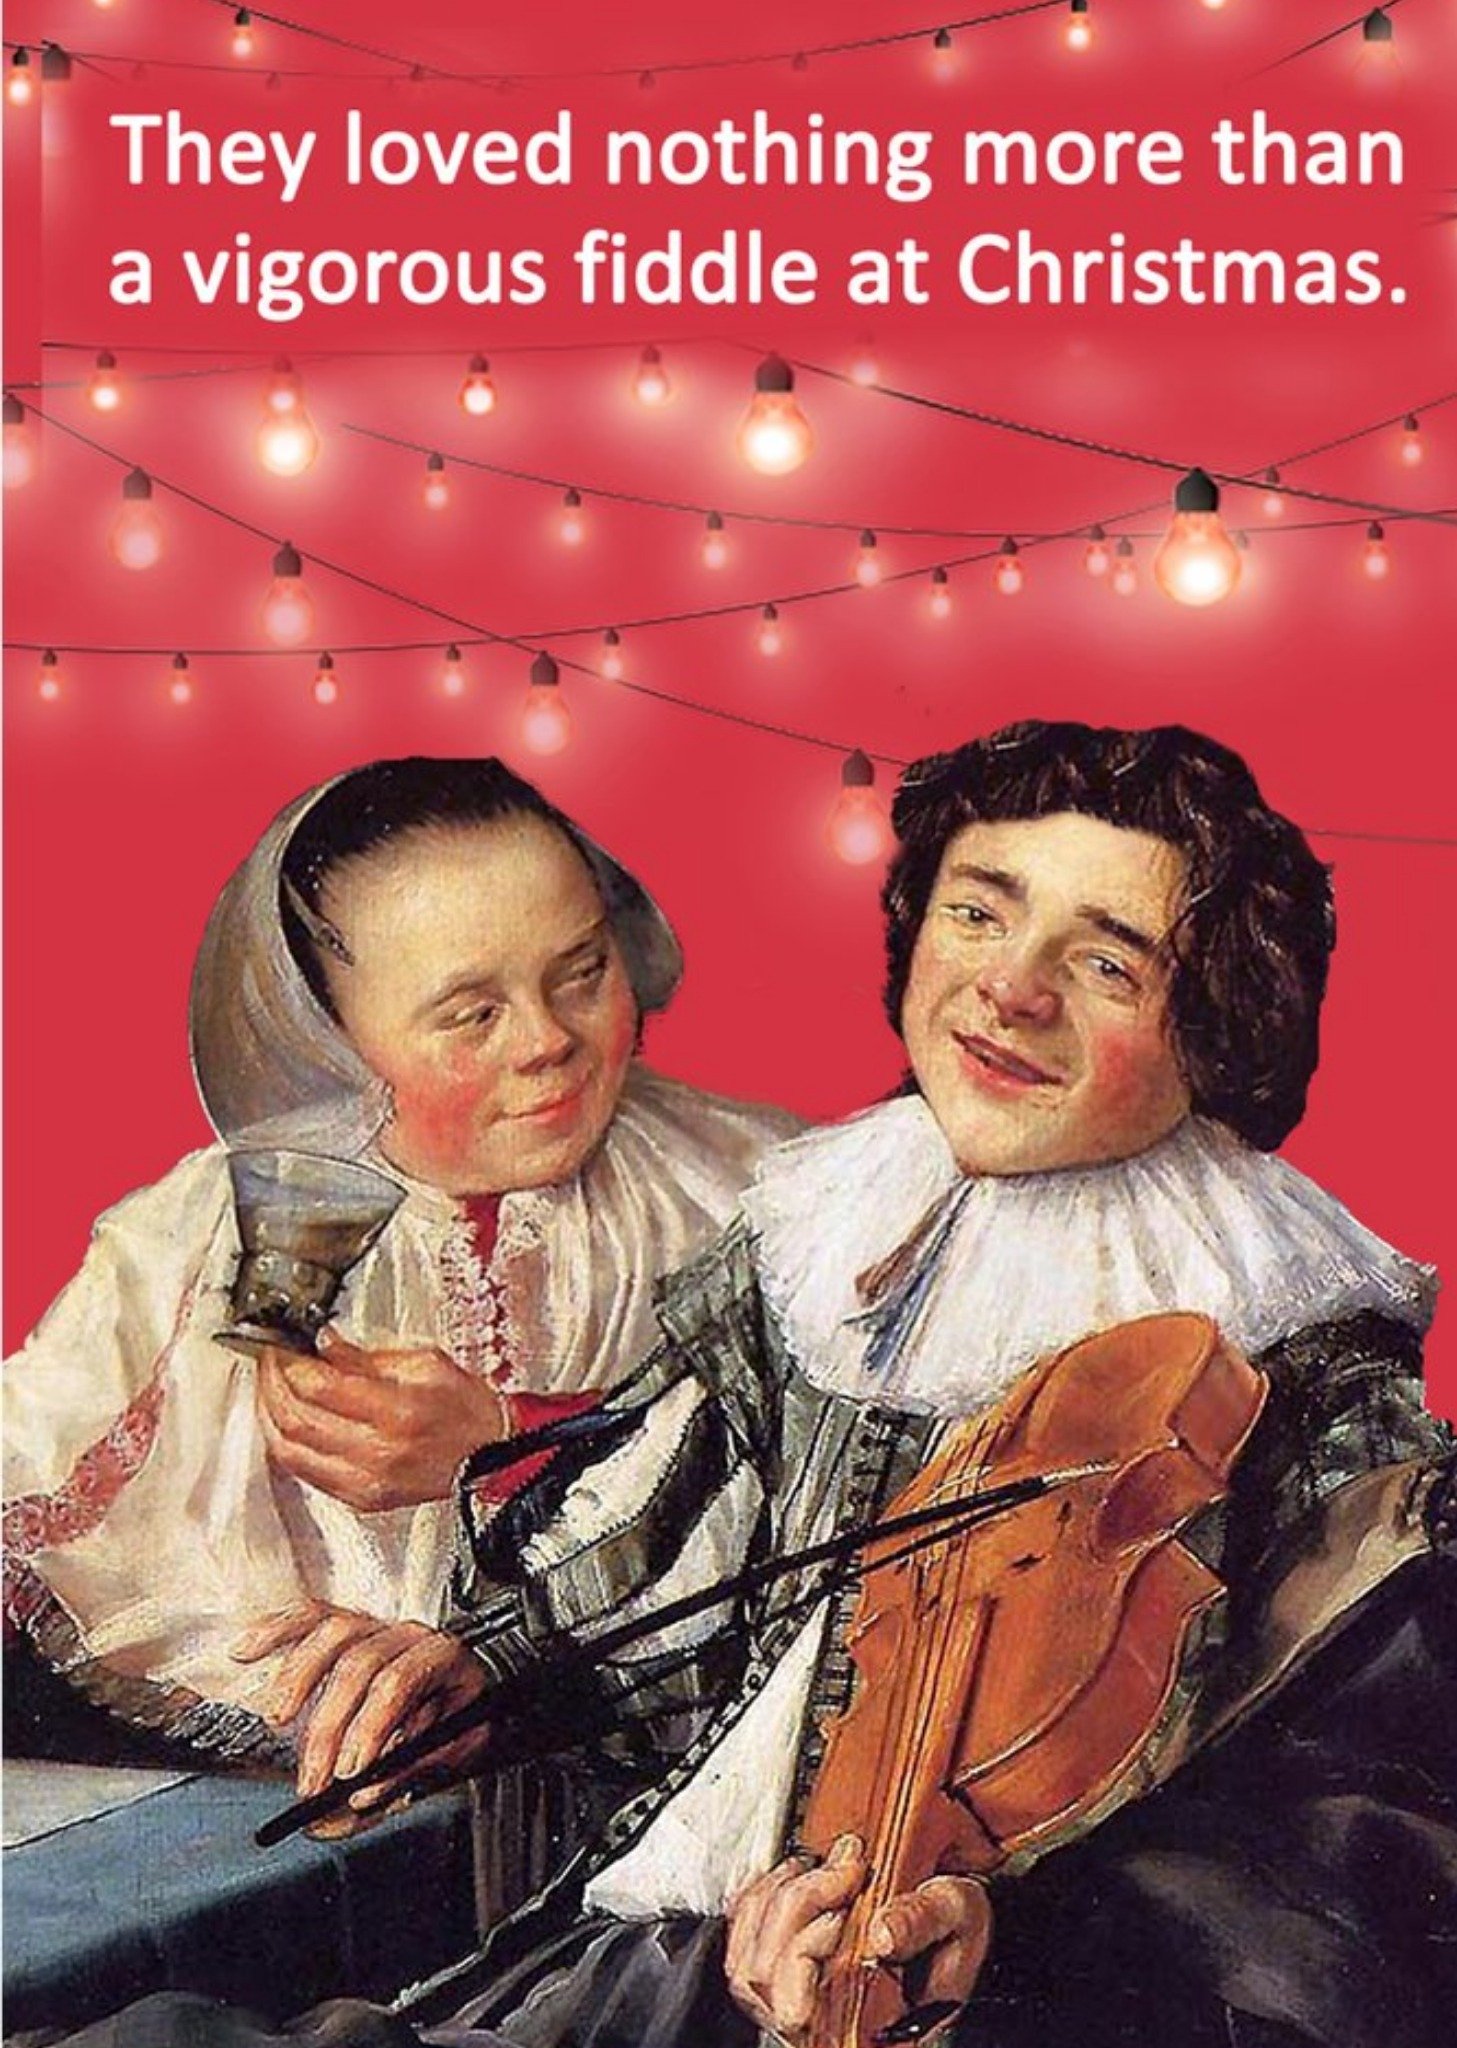 Go La La They Loved Nothing More Than A Vigorous Fiddle At Christmas Vintage Funny Rude Card Ecard